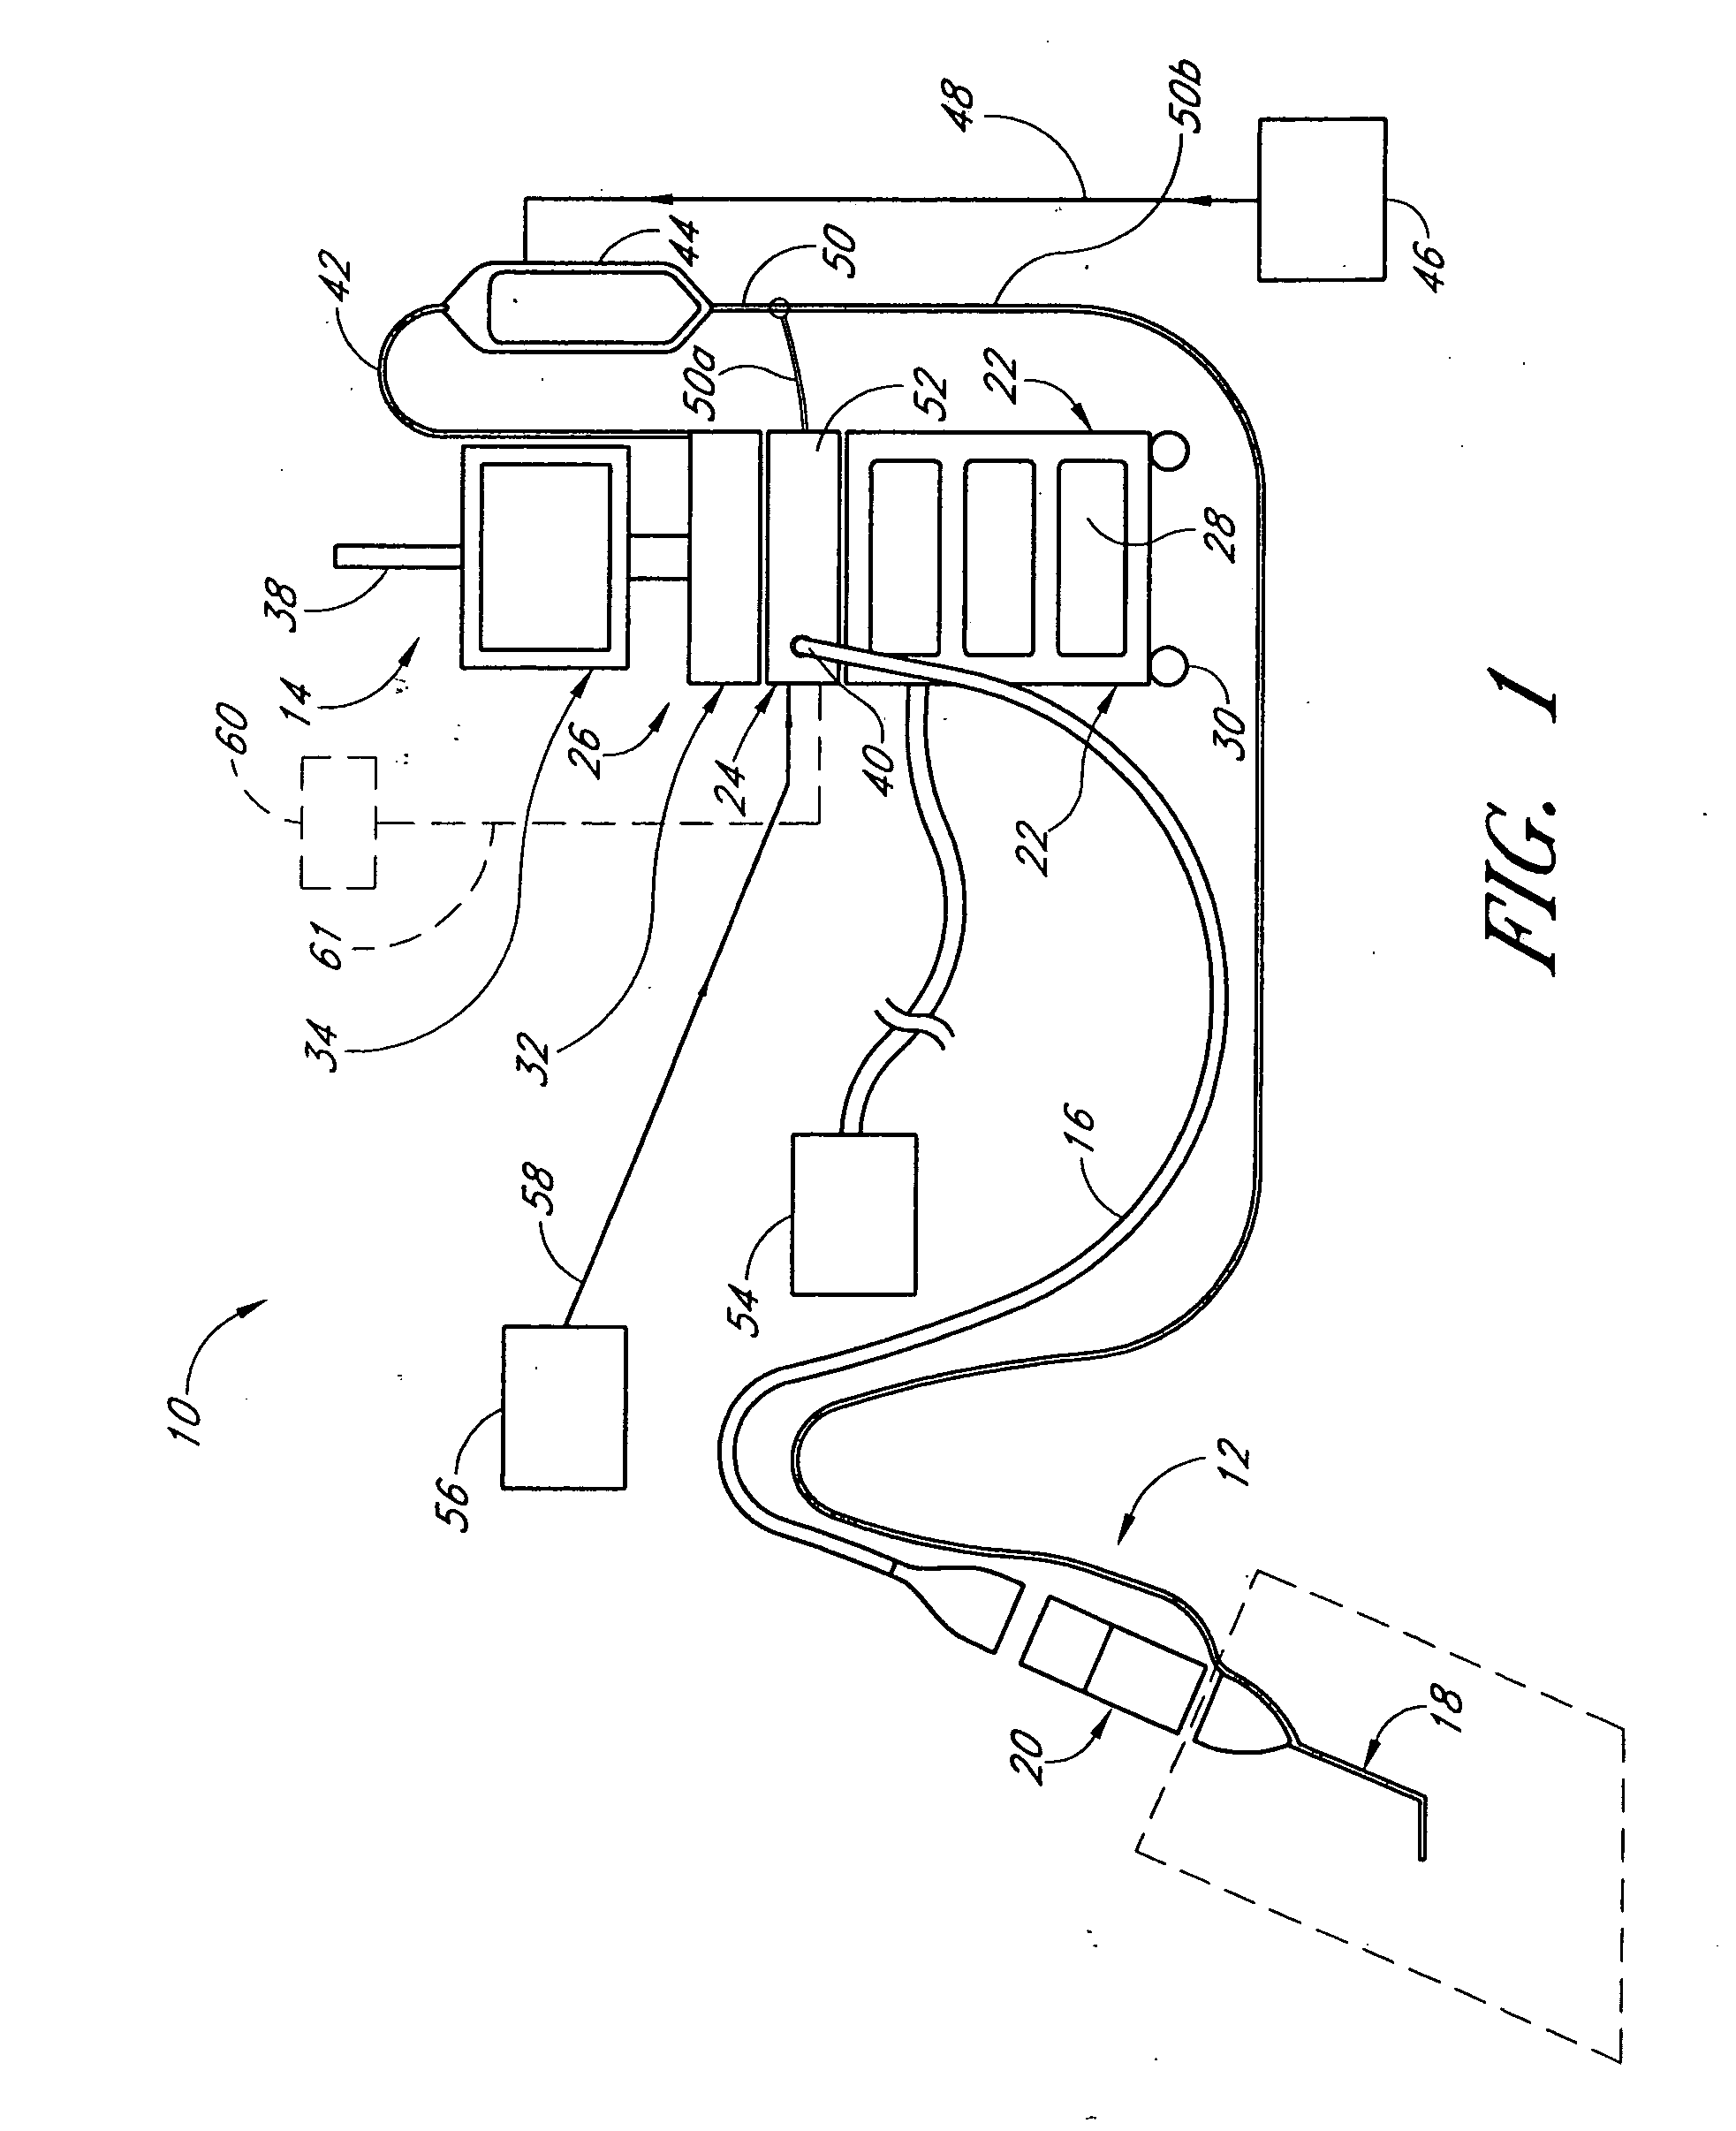 Surgical file system with fluid system